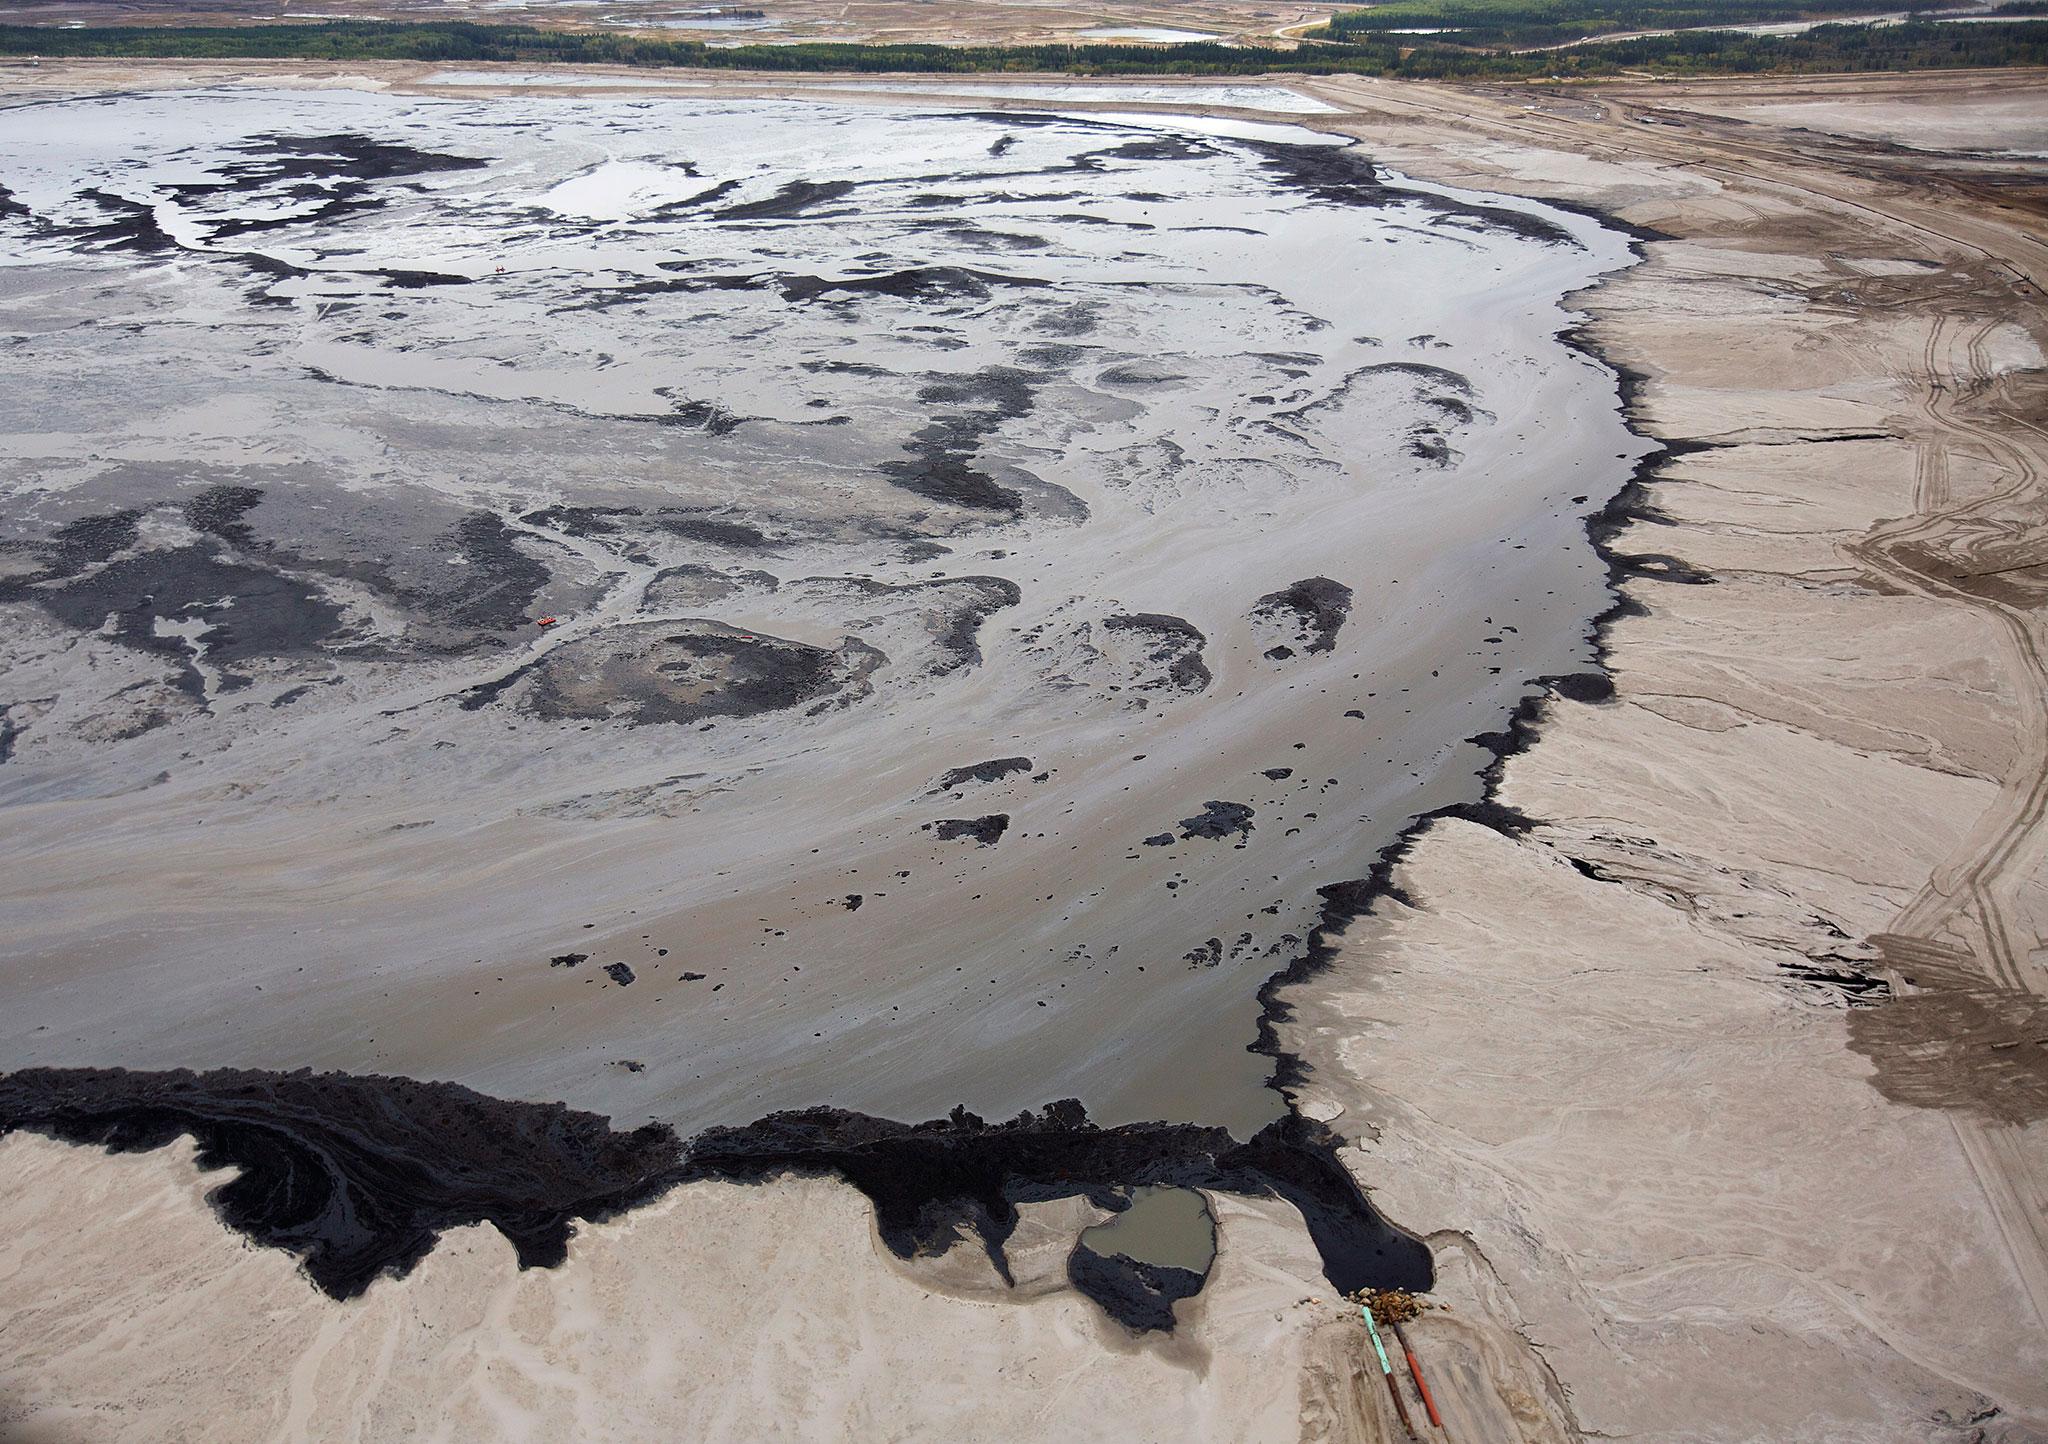 Tar sands are worse for the climate than conventional sources of oil, sometimes producing three or four times the amount of greenhouse gases